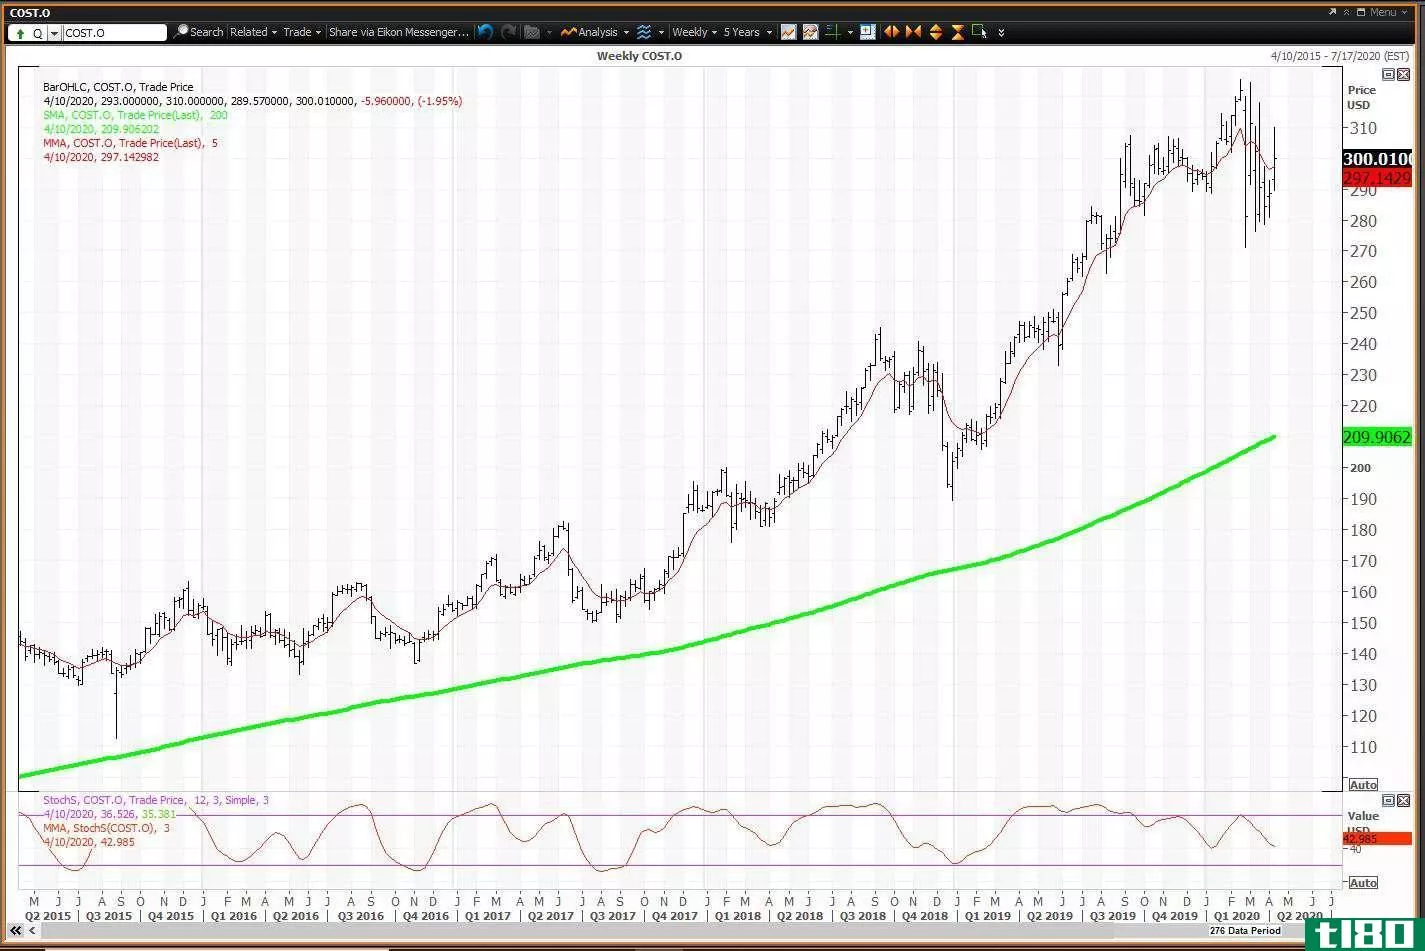 Weekly chart showing the share price performance of Costco Wholesale Corporation (COST)